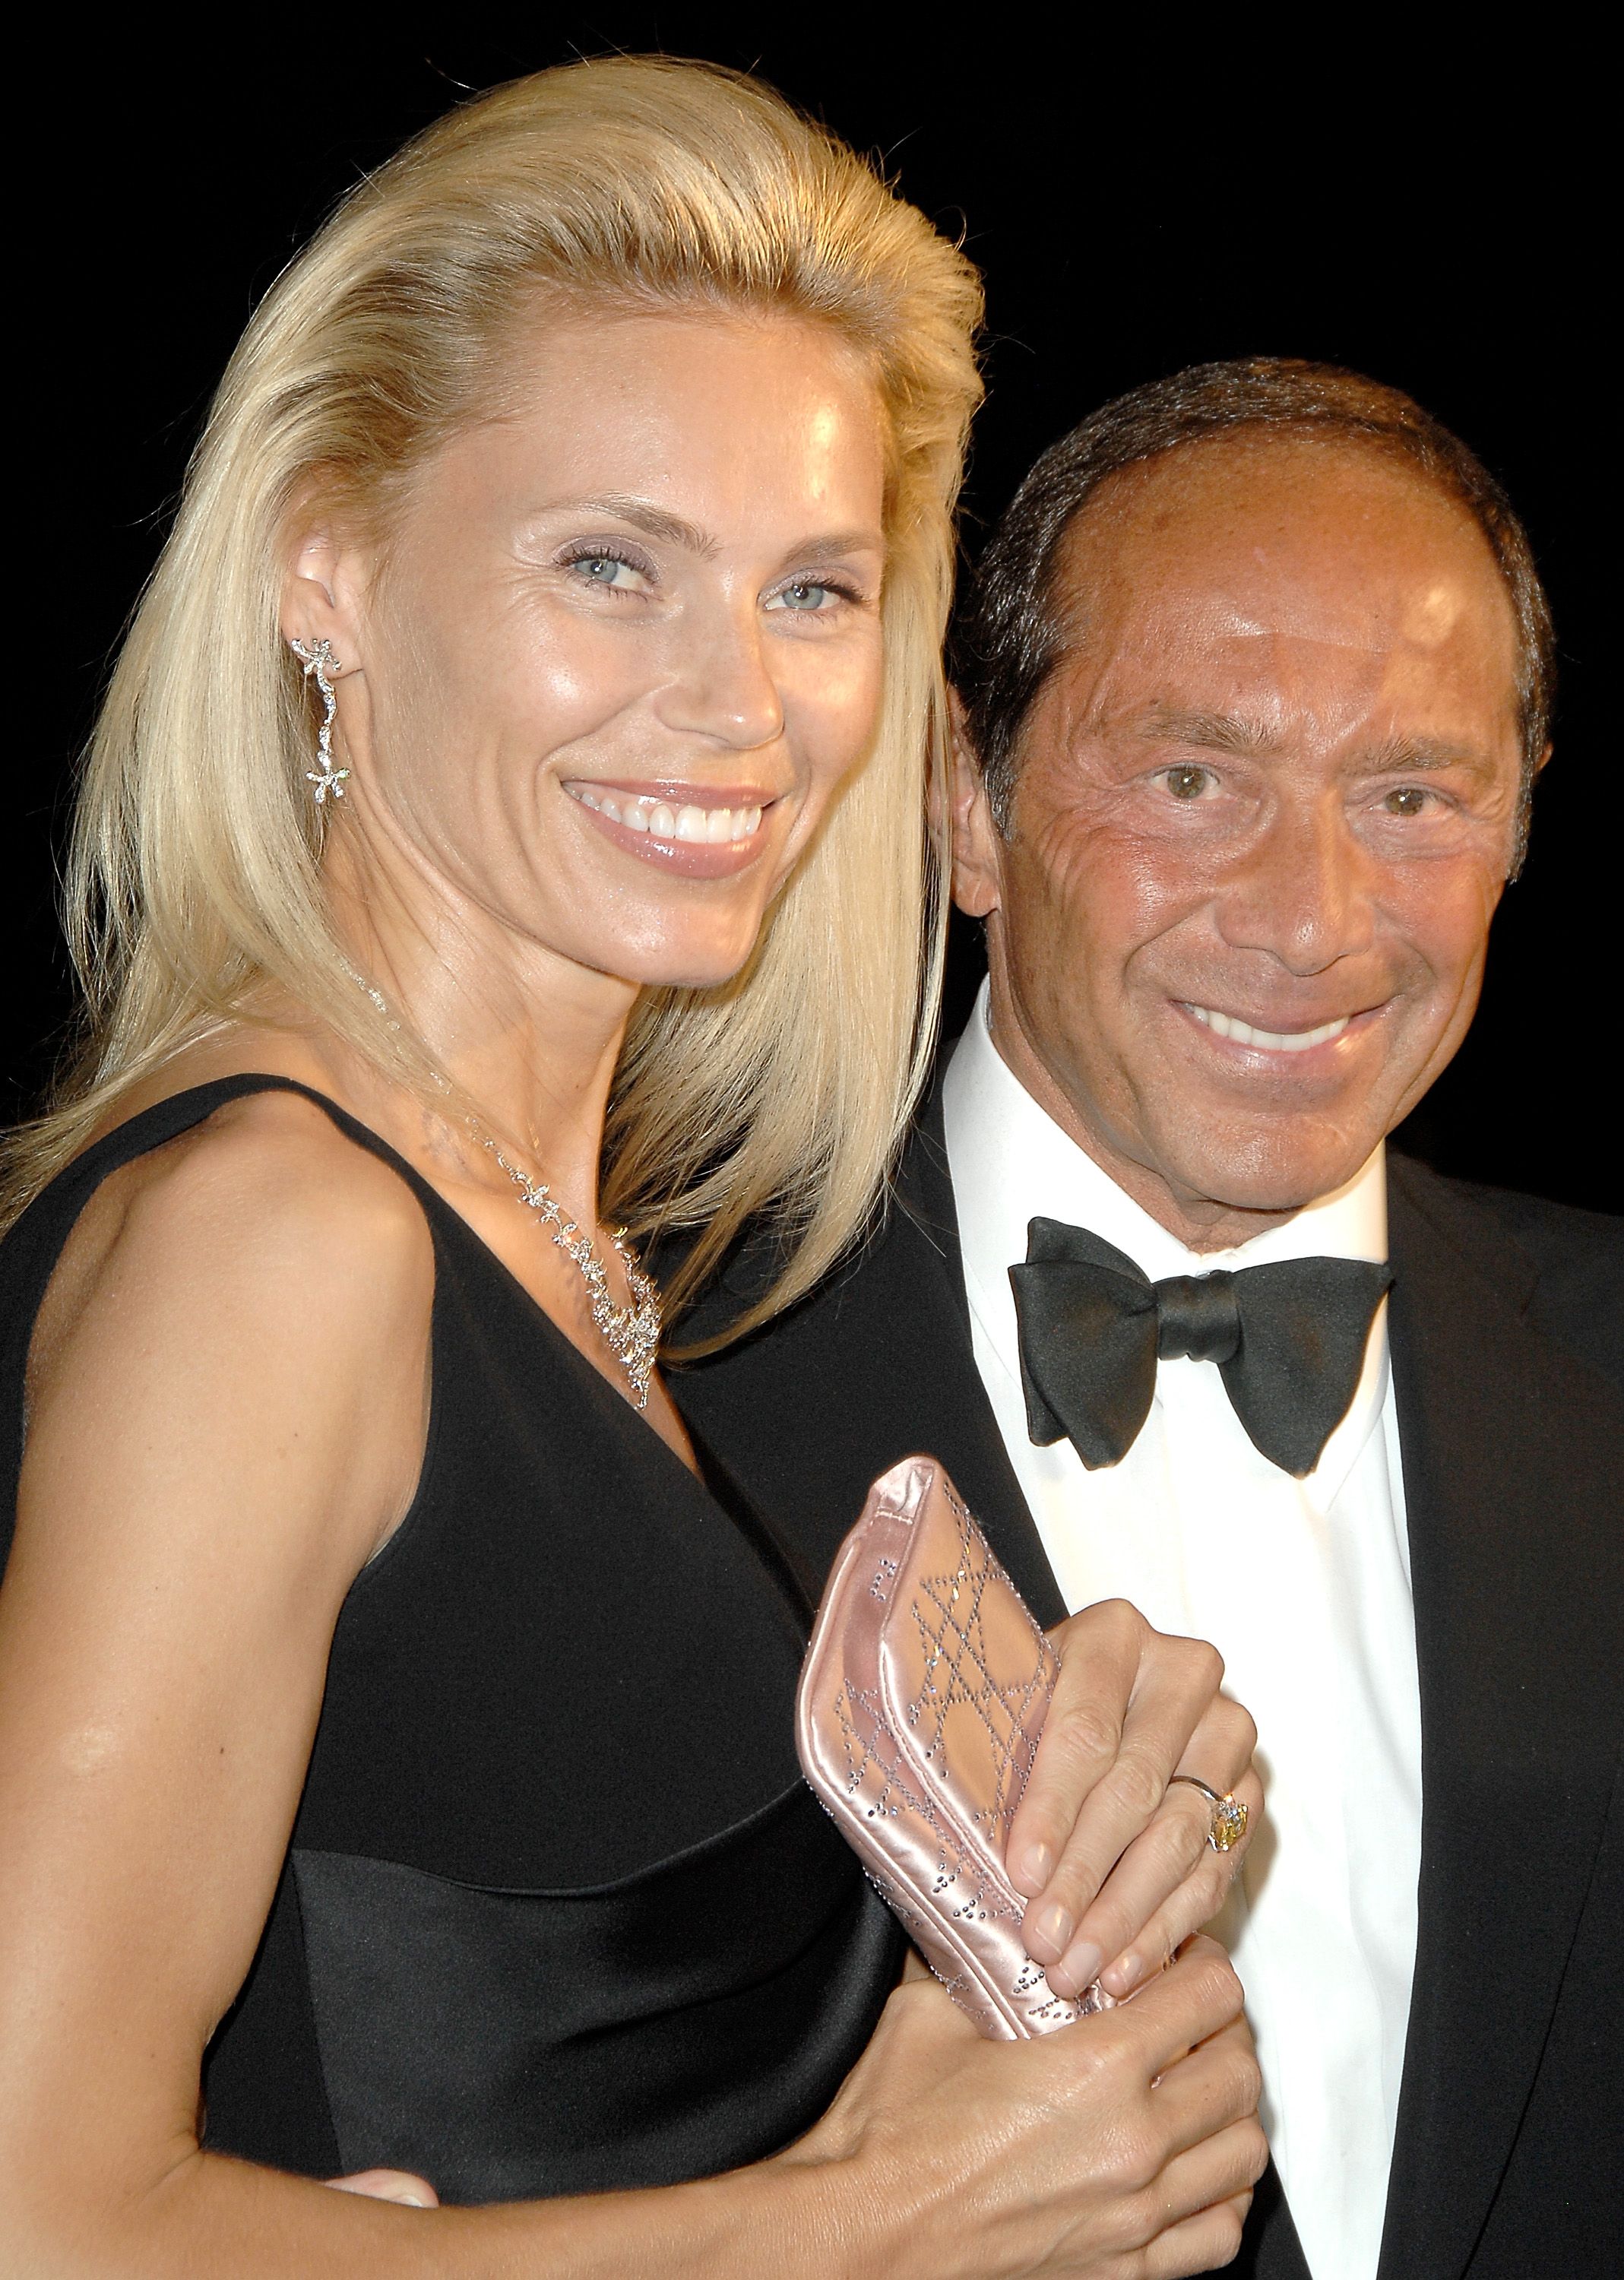 Anna Åberg and Paul Anka at the 39th annual Songwriters Hall Of Fame Awards dinner on June 19, 2008, in New York | Photo: Joe Corrigan/Getty Images